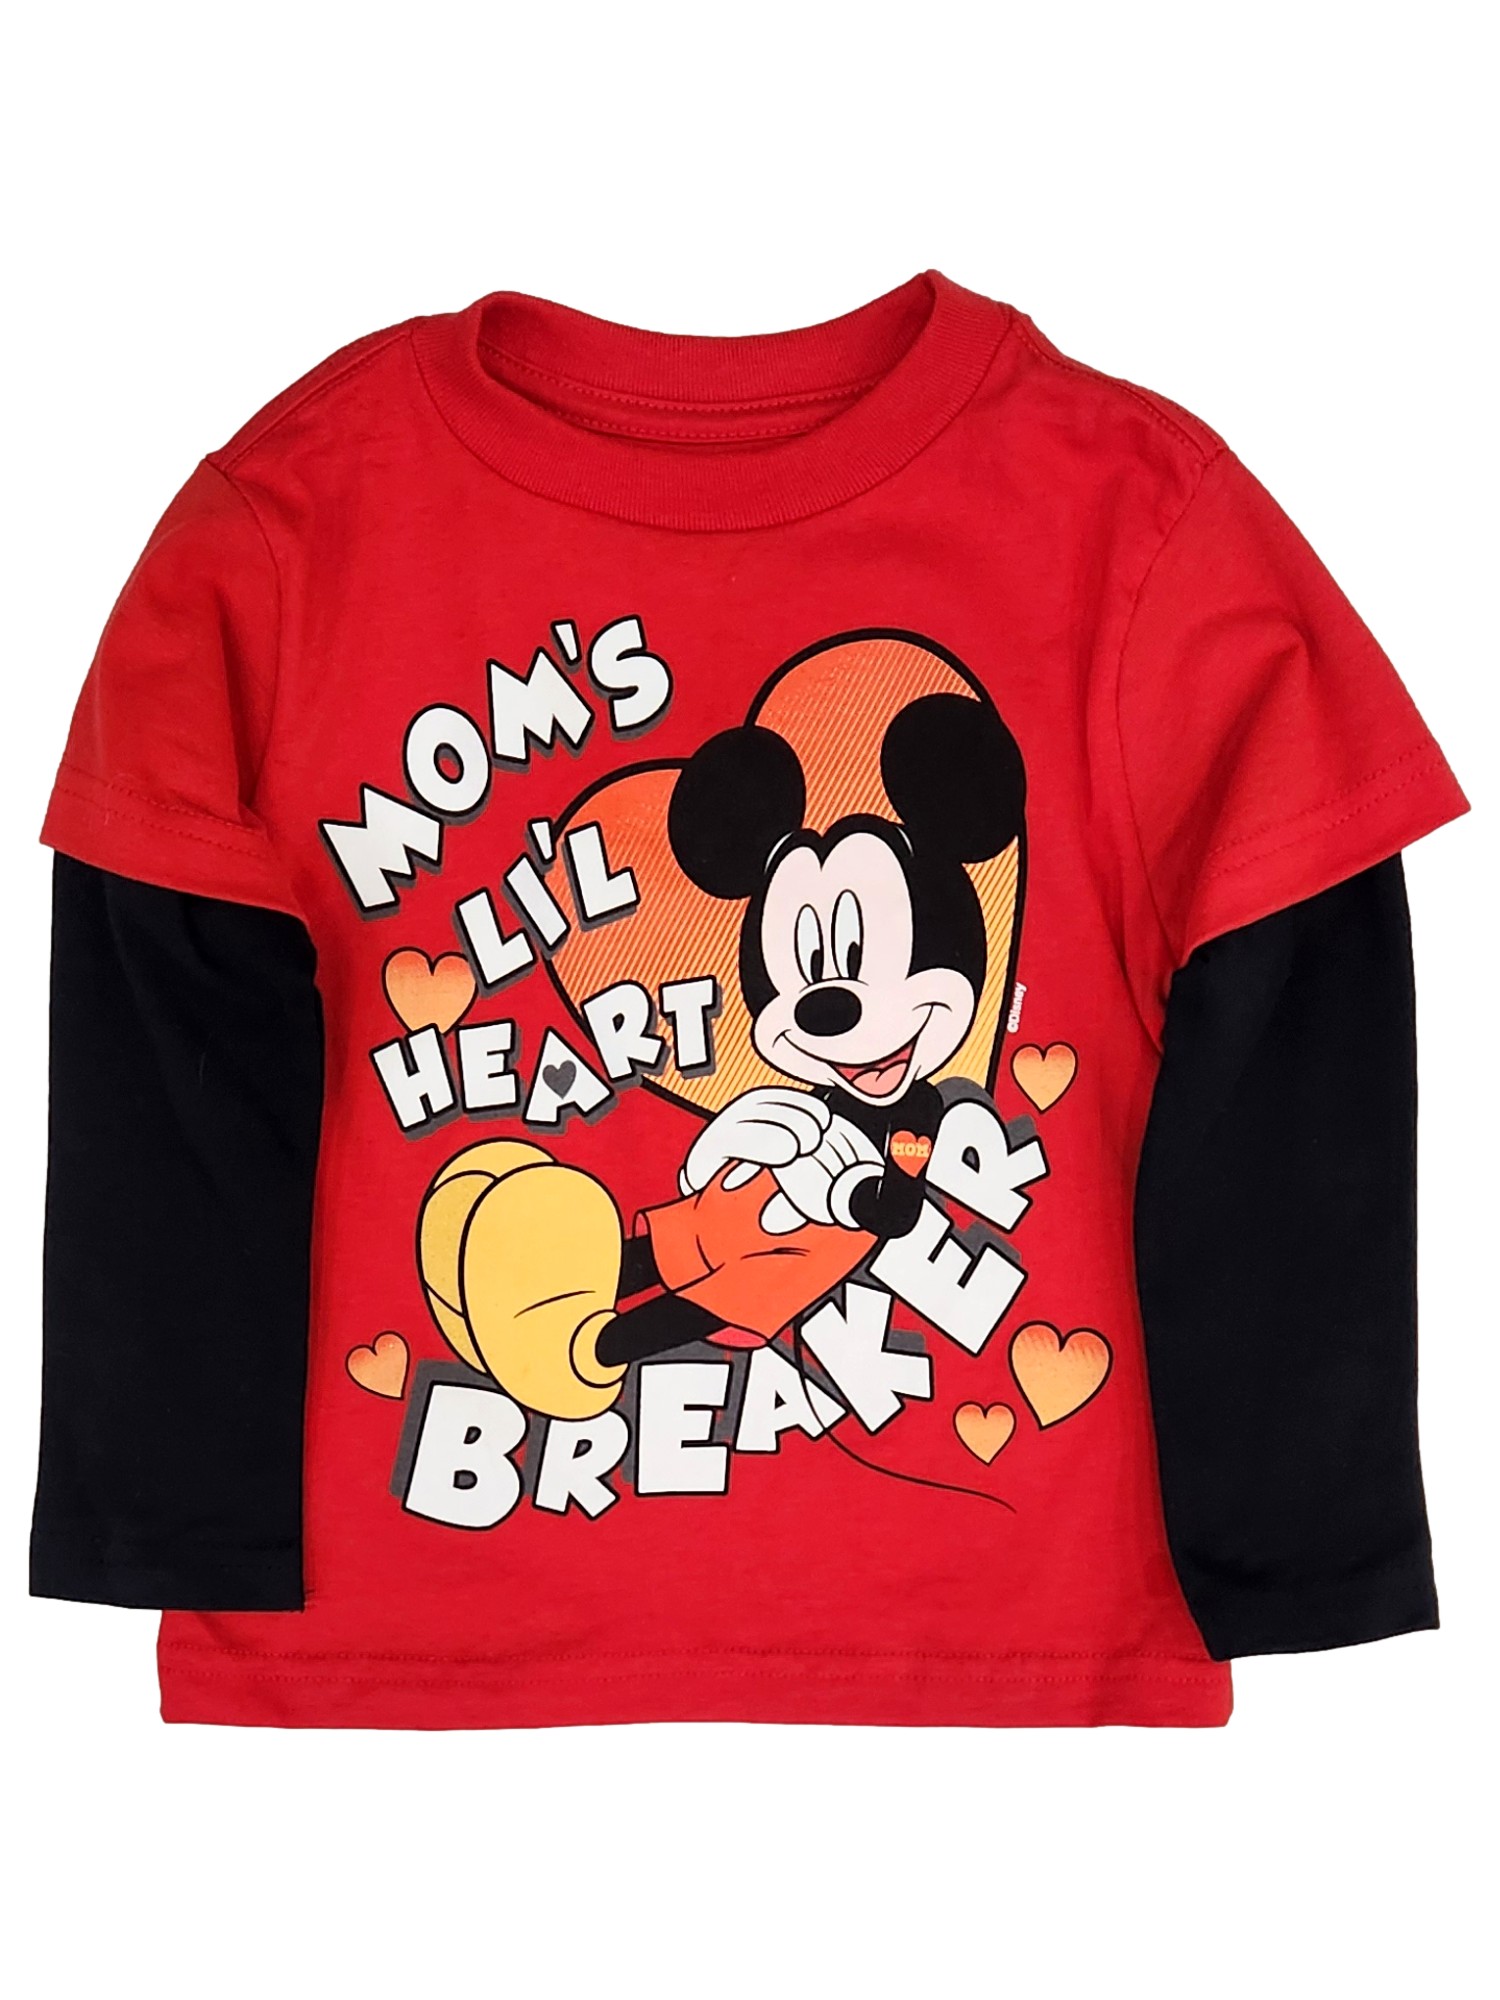 Disney Toddler Boys Red Mickey Mouse Heart Breaker Valentines T-Shirt